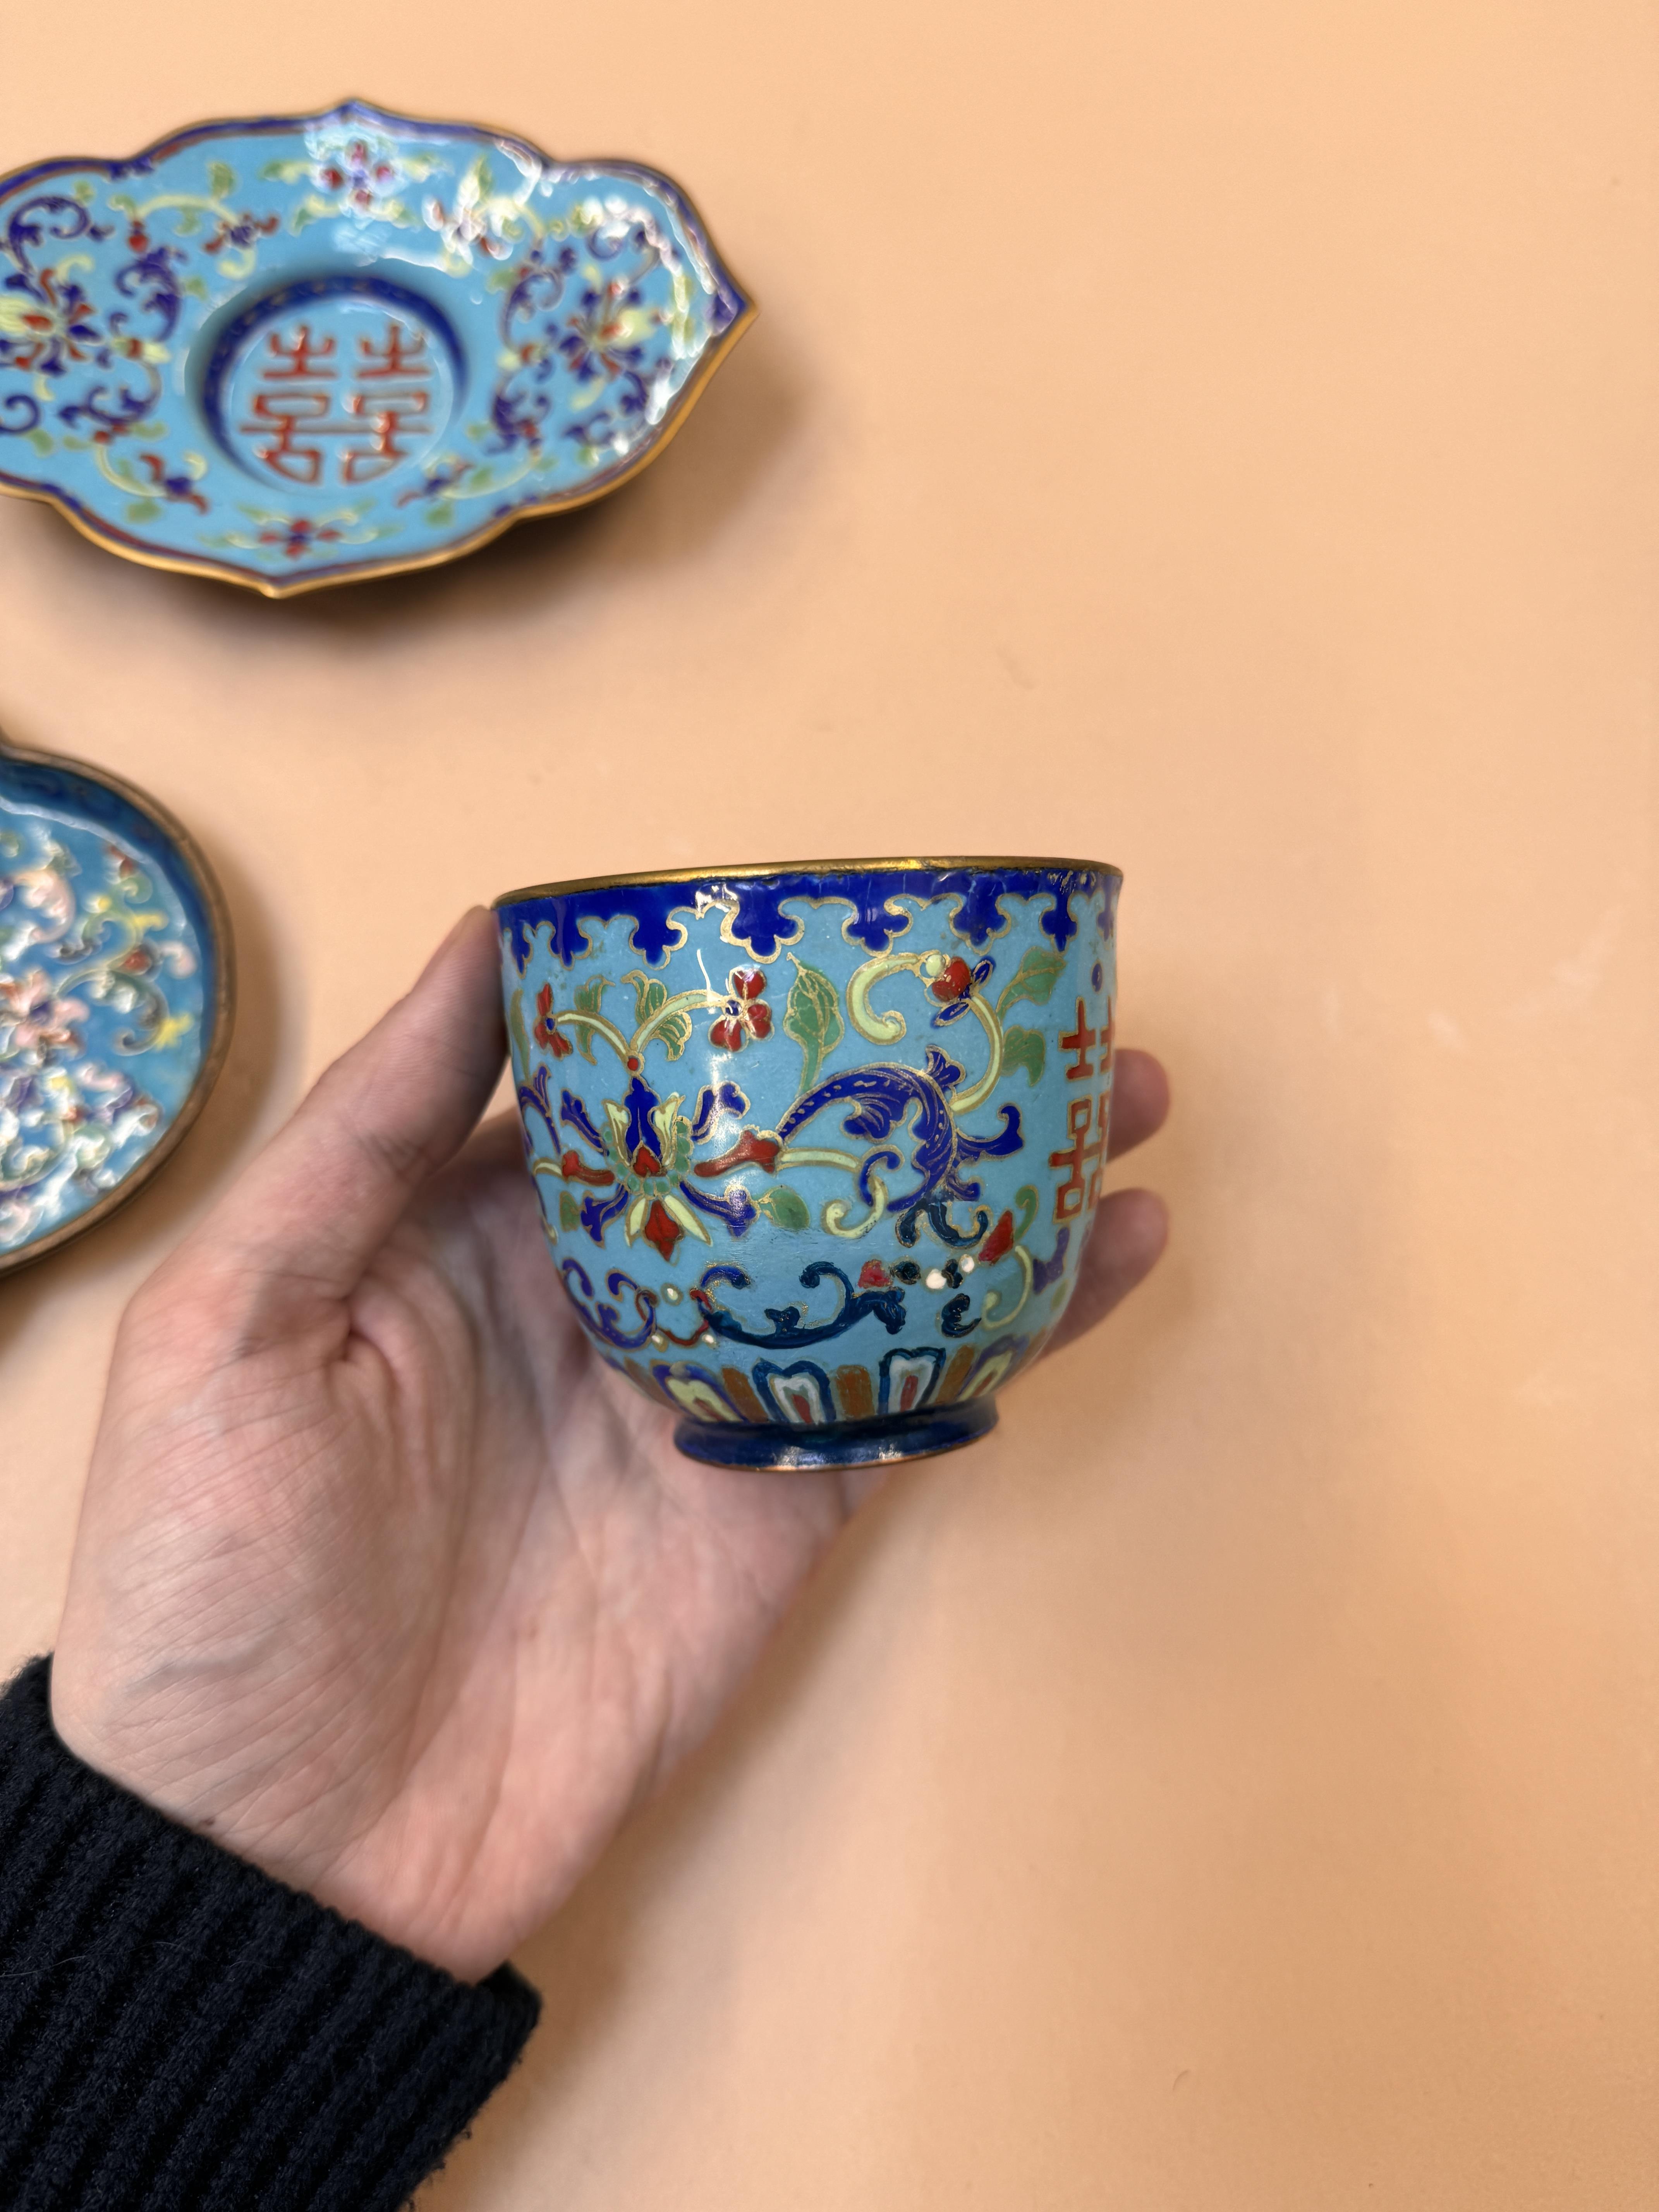 A CHINESE CANTON ENAMEL CUP, STAND AND DISH 清十九世紀 廣東銅胎畫琺瑯「壽」盤及「囍」盃及盤 - Image 24 of 31